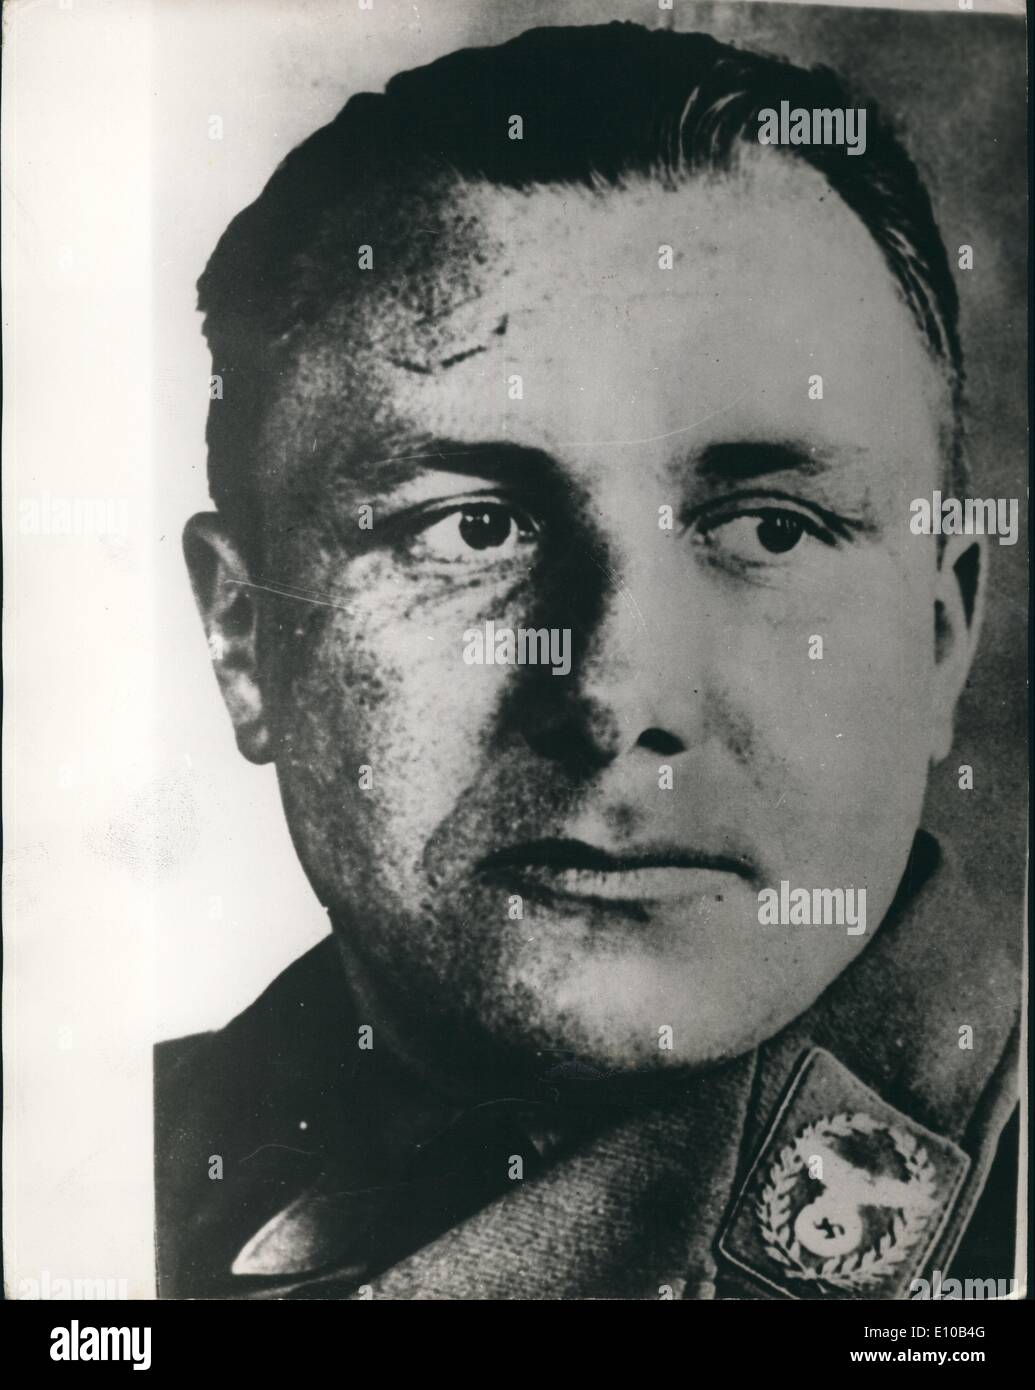 Mar. 03, 1972 - Man Alleged To Be Martin Bormann Arrested In Jungle: An elderly German recluse alleged to be Martin Bormann, Hitler's deputy, was under arrest today after secret police marched into his jungle home. Colombia has asked West Germany to supply Bormann's fingerprints for comparison with those of the arrested man, Johann Ehrmann. Security men arrested Ehrmann in a remote region of southern Colombia after a magazine claimed that he was really the deputy Nazi leader. Bormann would be 71 if still alive today. Ehrmann says he is 72 Stock Photo